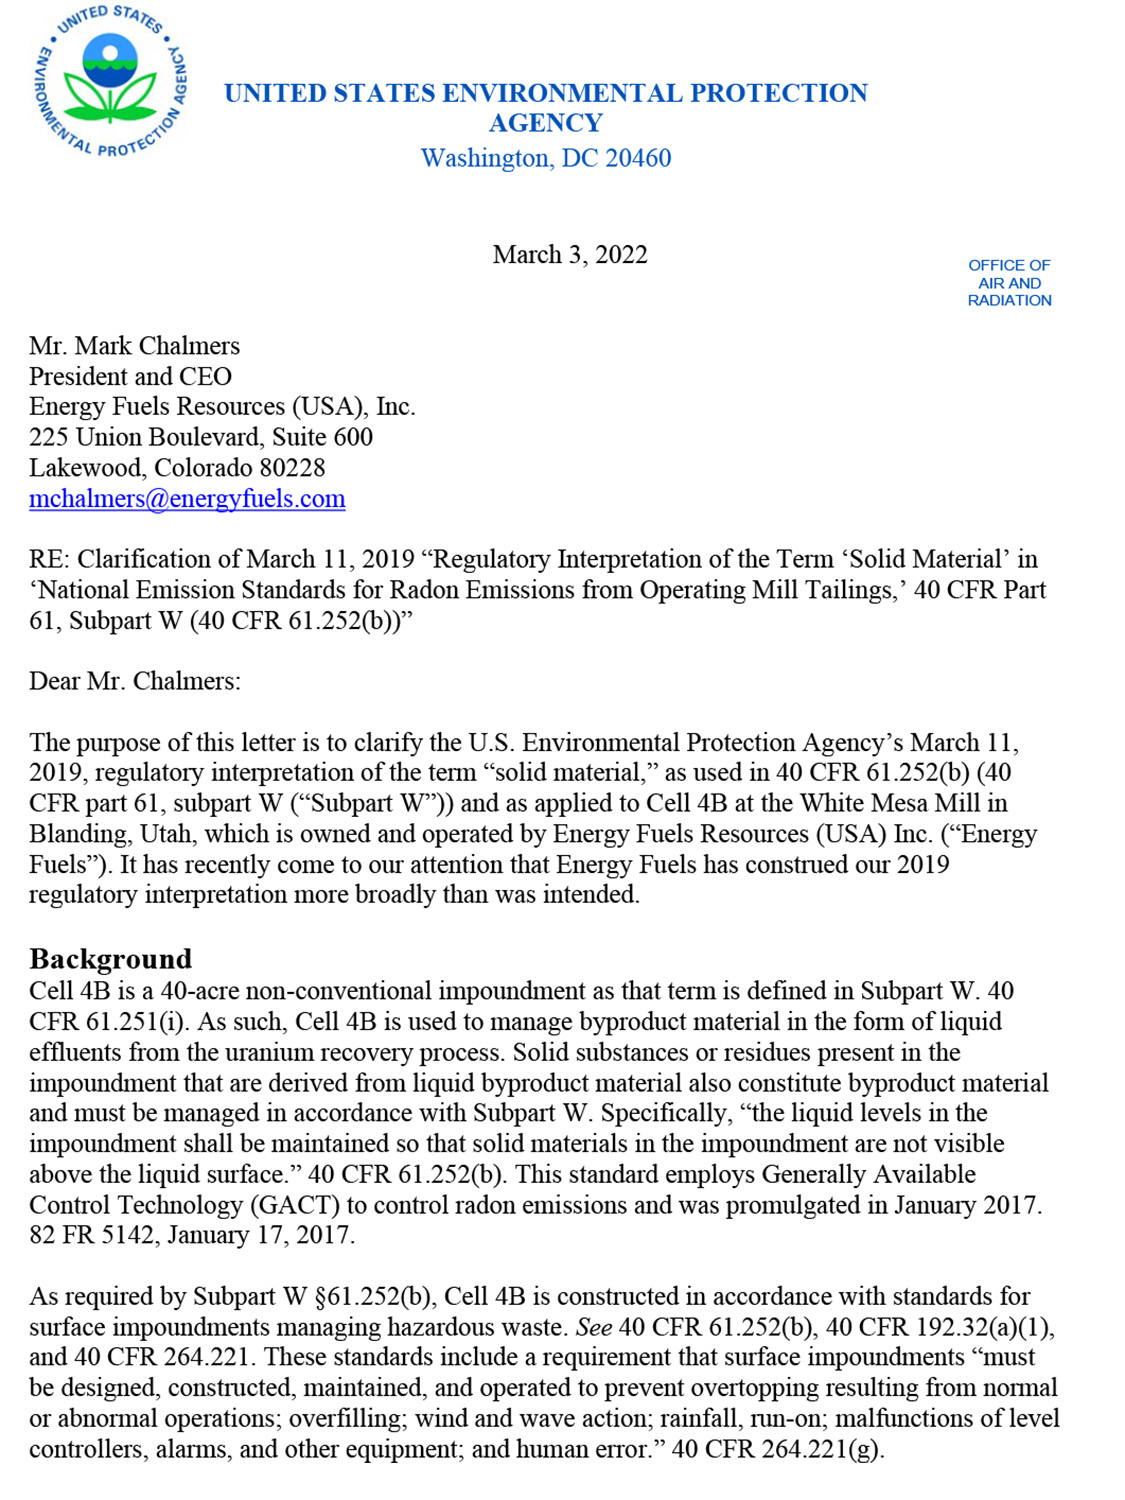 EPA letter to Energy Fuels re: unacceptability notice